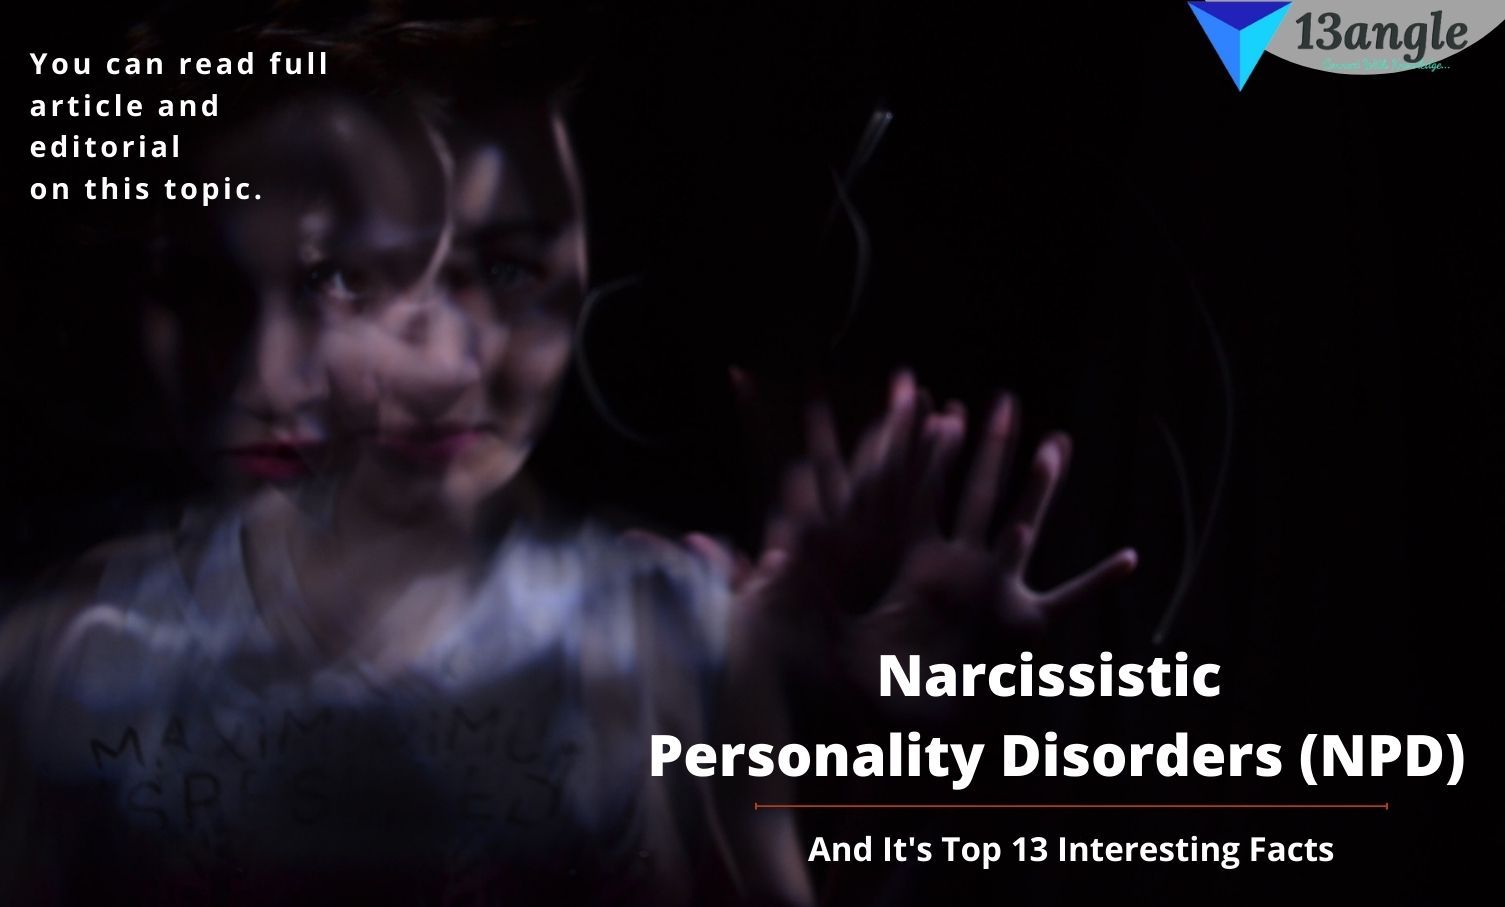 Narcissistic Personality Disorders (NPD) And Their Top 13 Interesting Facts- 13angle.com